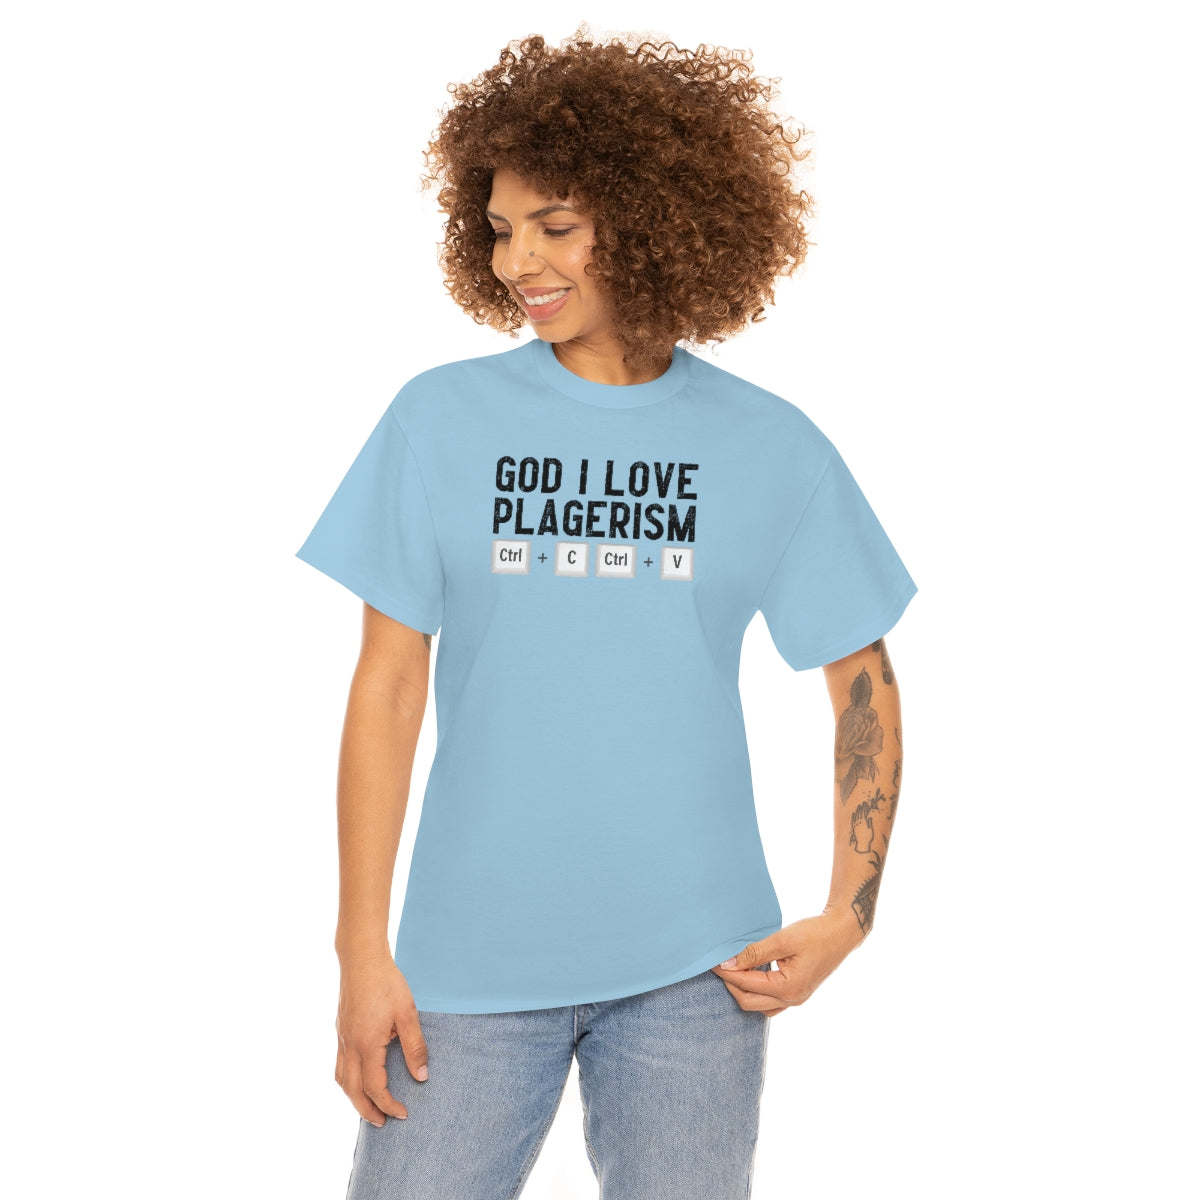 God I Love Plagerism - Unisex Heavy Cotton Tee - All Colors